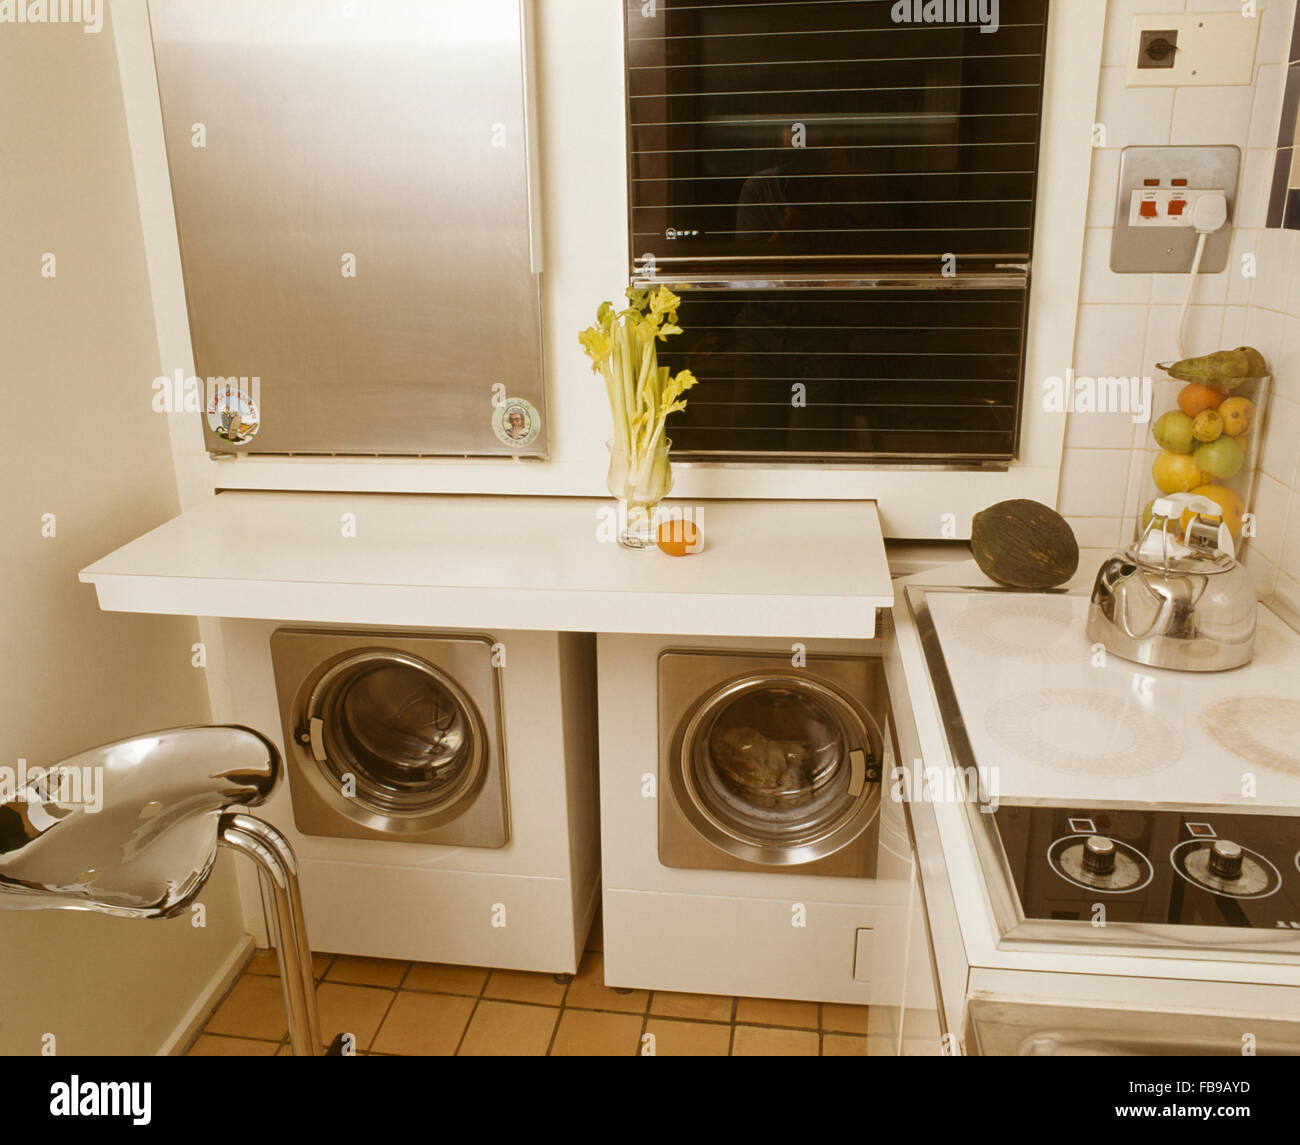 Wall mounted oven above washing machine and dryer in small seventies kitchen Stock Photo